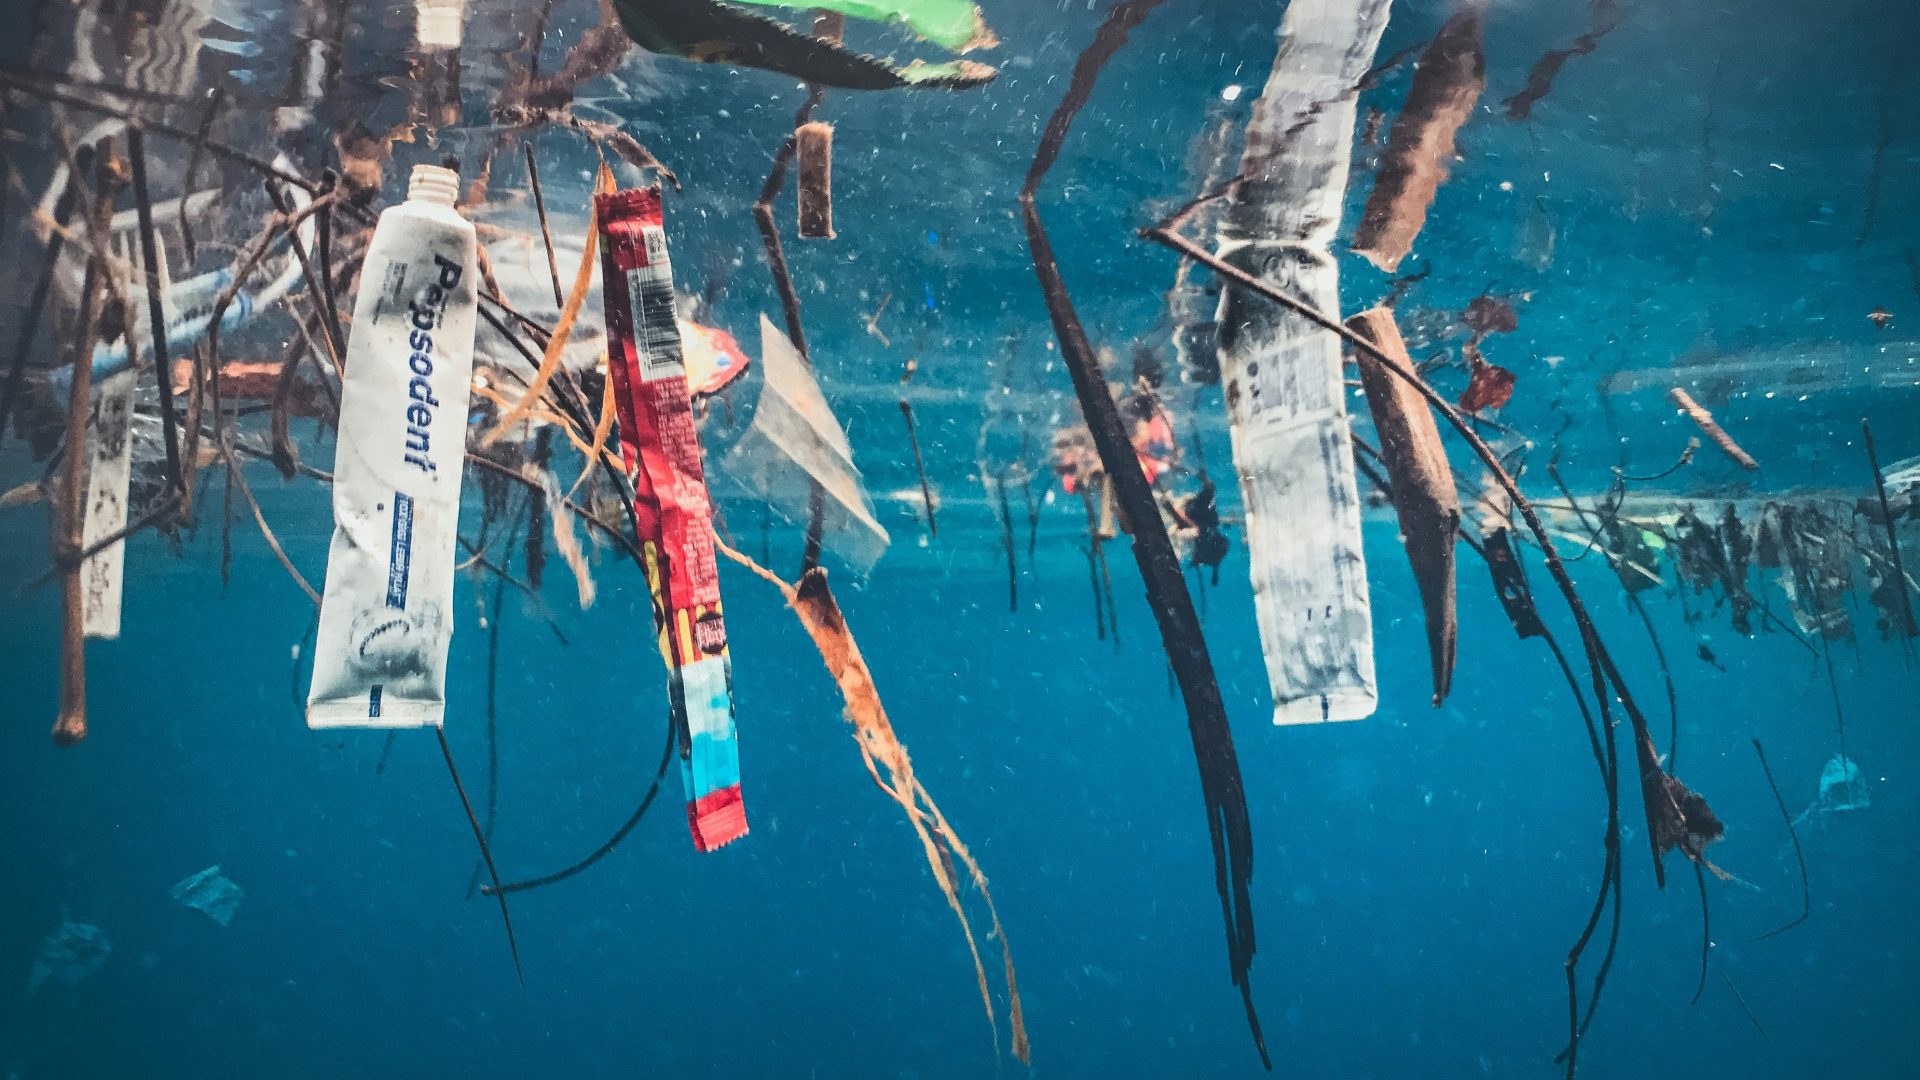 An underwater view of plastic waste, including snack wrappers and toothpaste tubes, floating on a body of water.